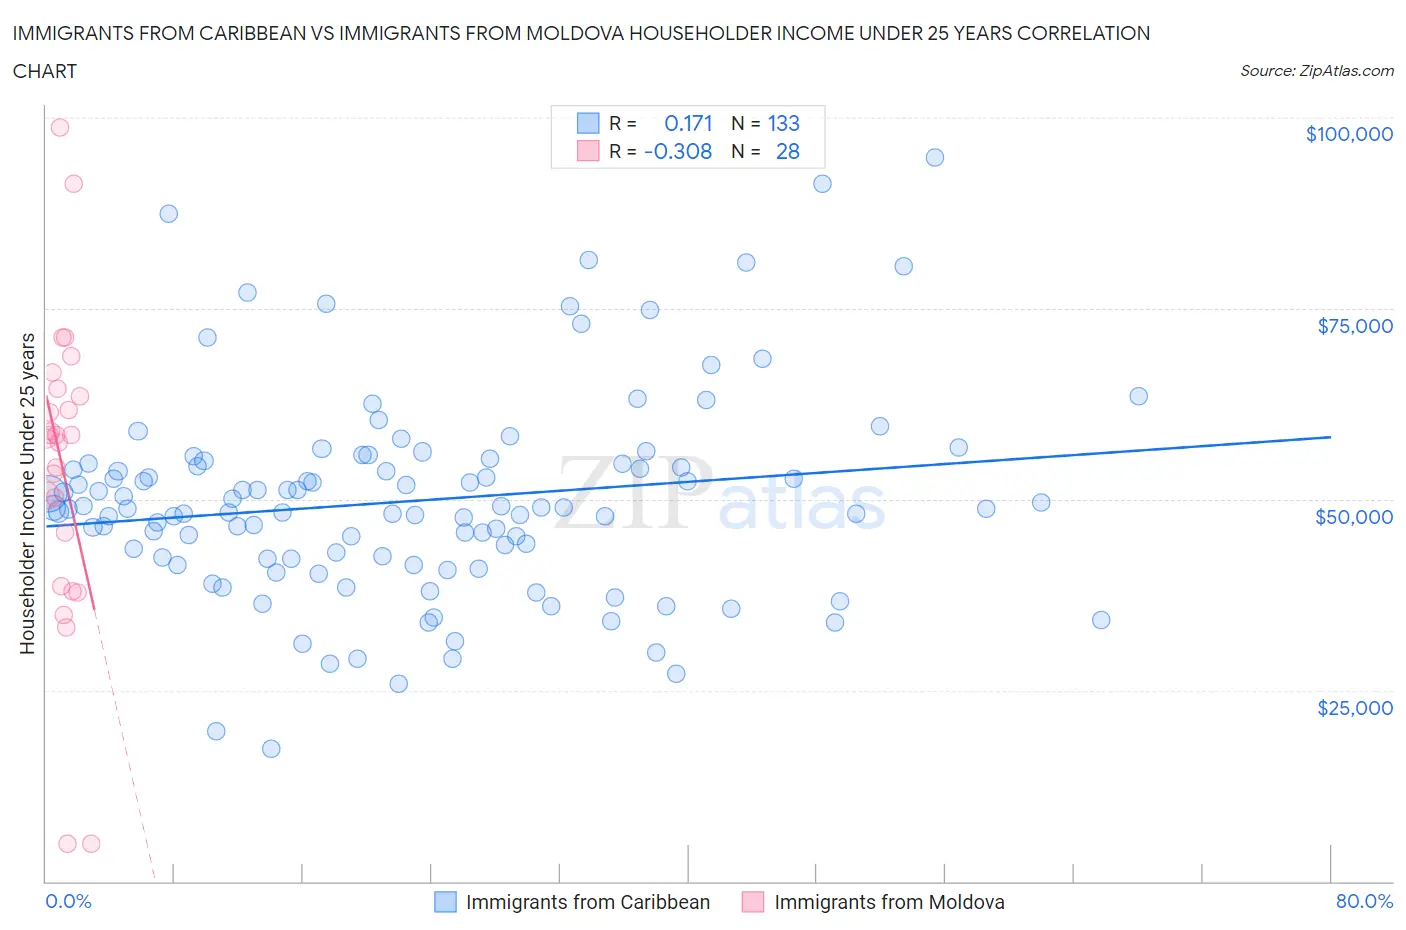 Immigrants from Caribbean vs Immigrants from Moldova Householder Income Under 25 years